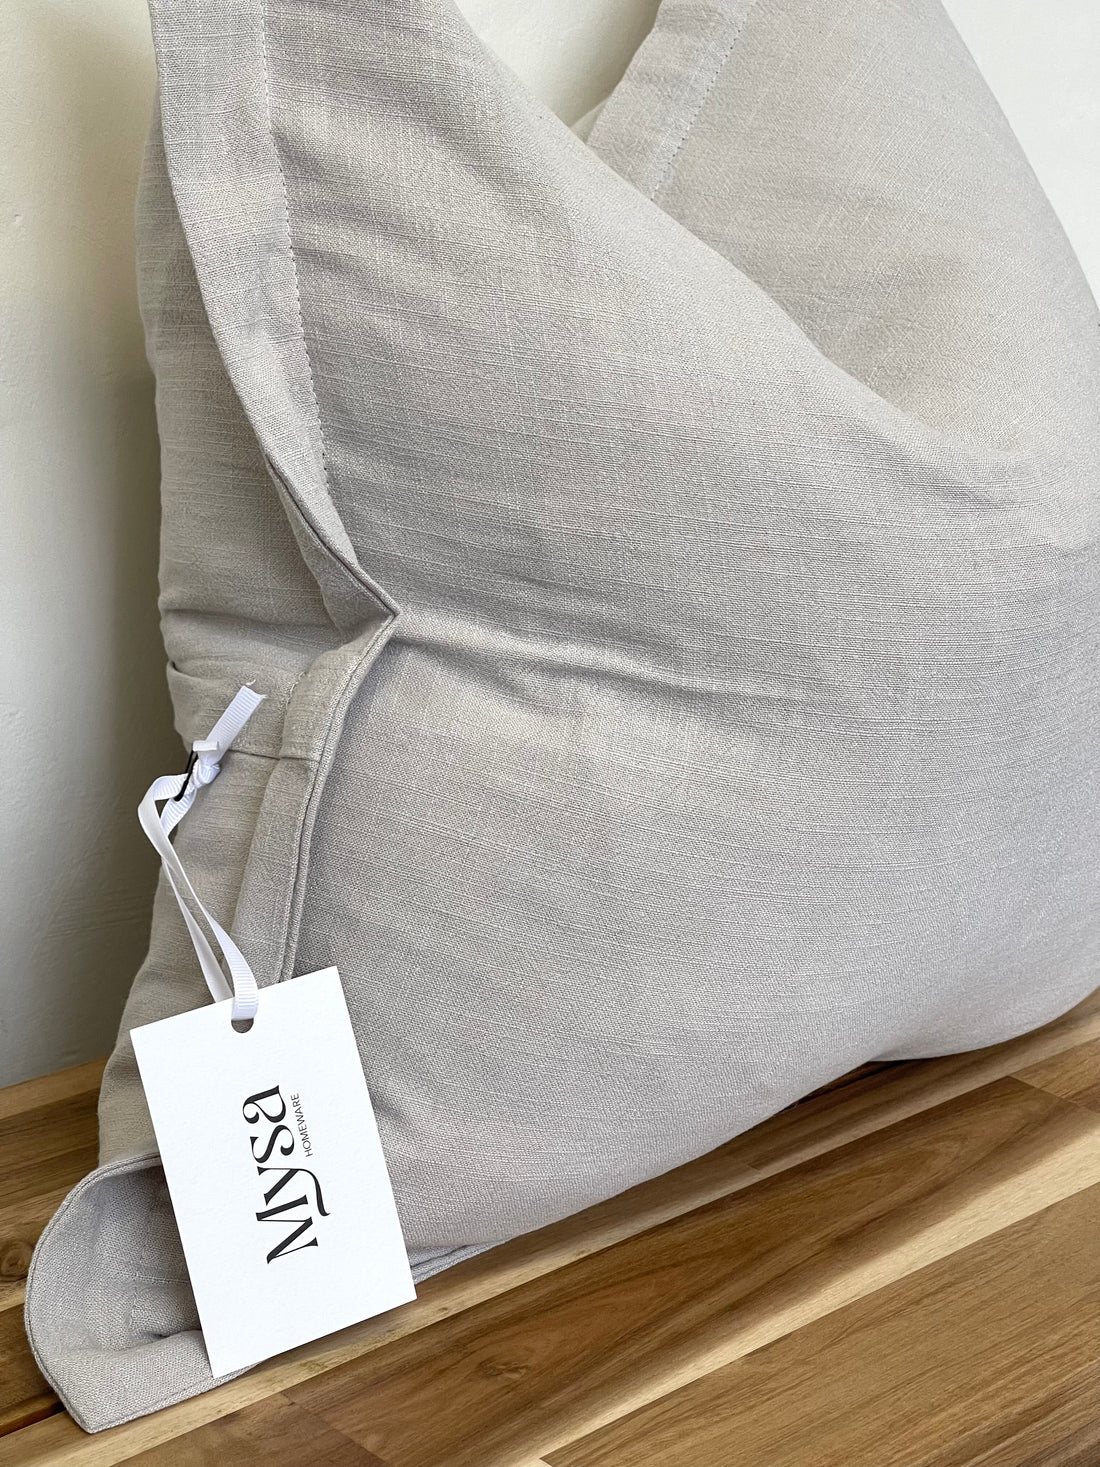 Luxury linen blend cushion in light grey, ideal for complementing a neutral aesthetic in home decor.